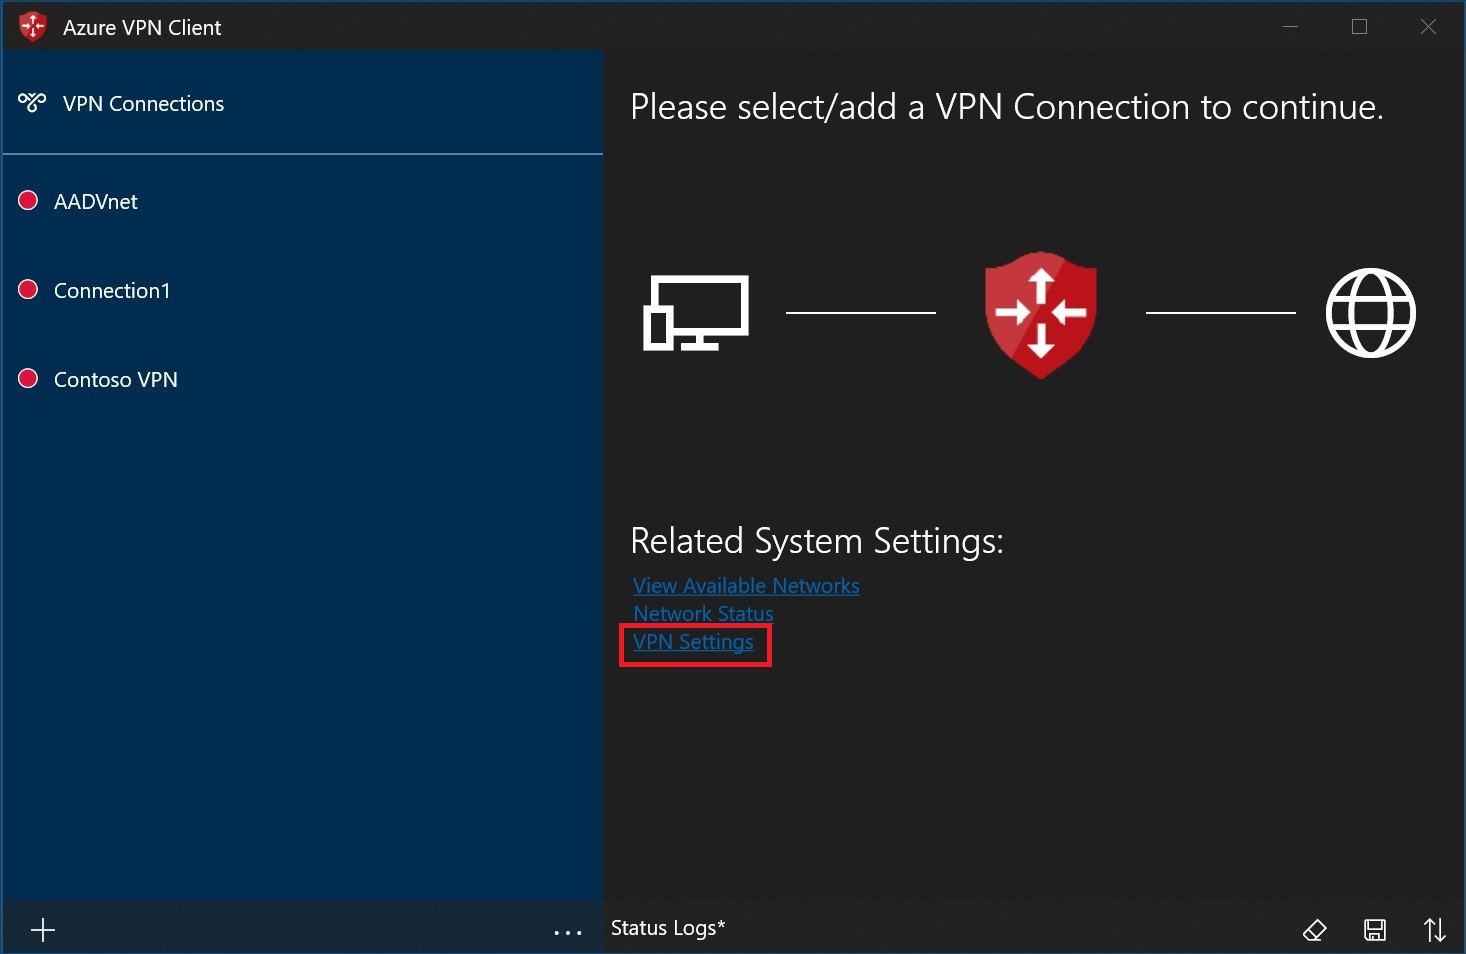 Screenshot of the VPN home page with "VPN Settings" selected.